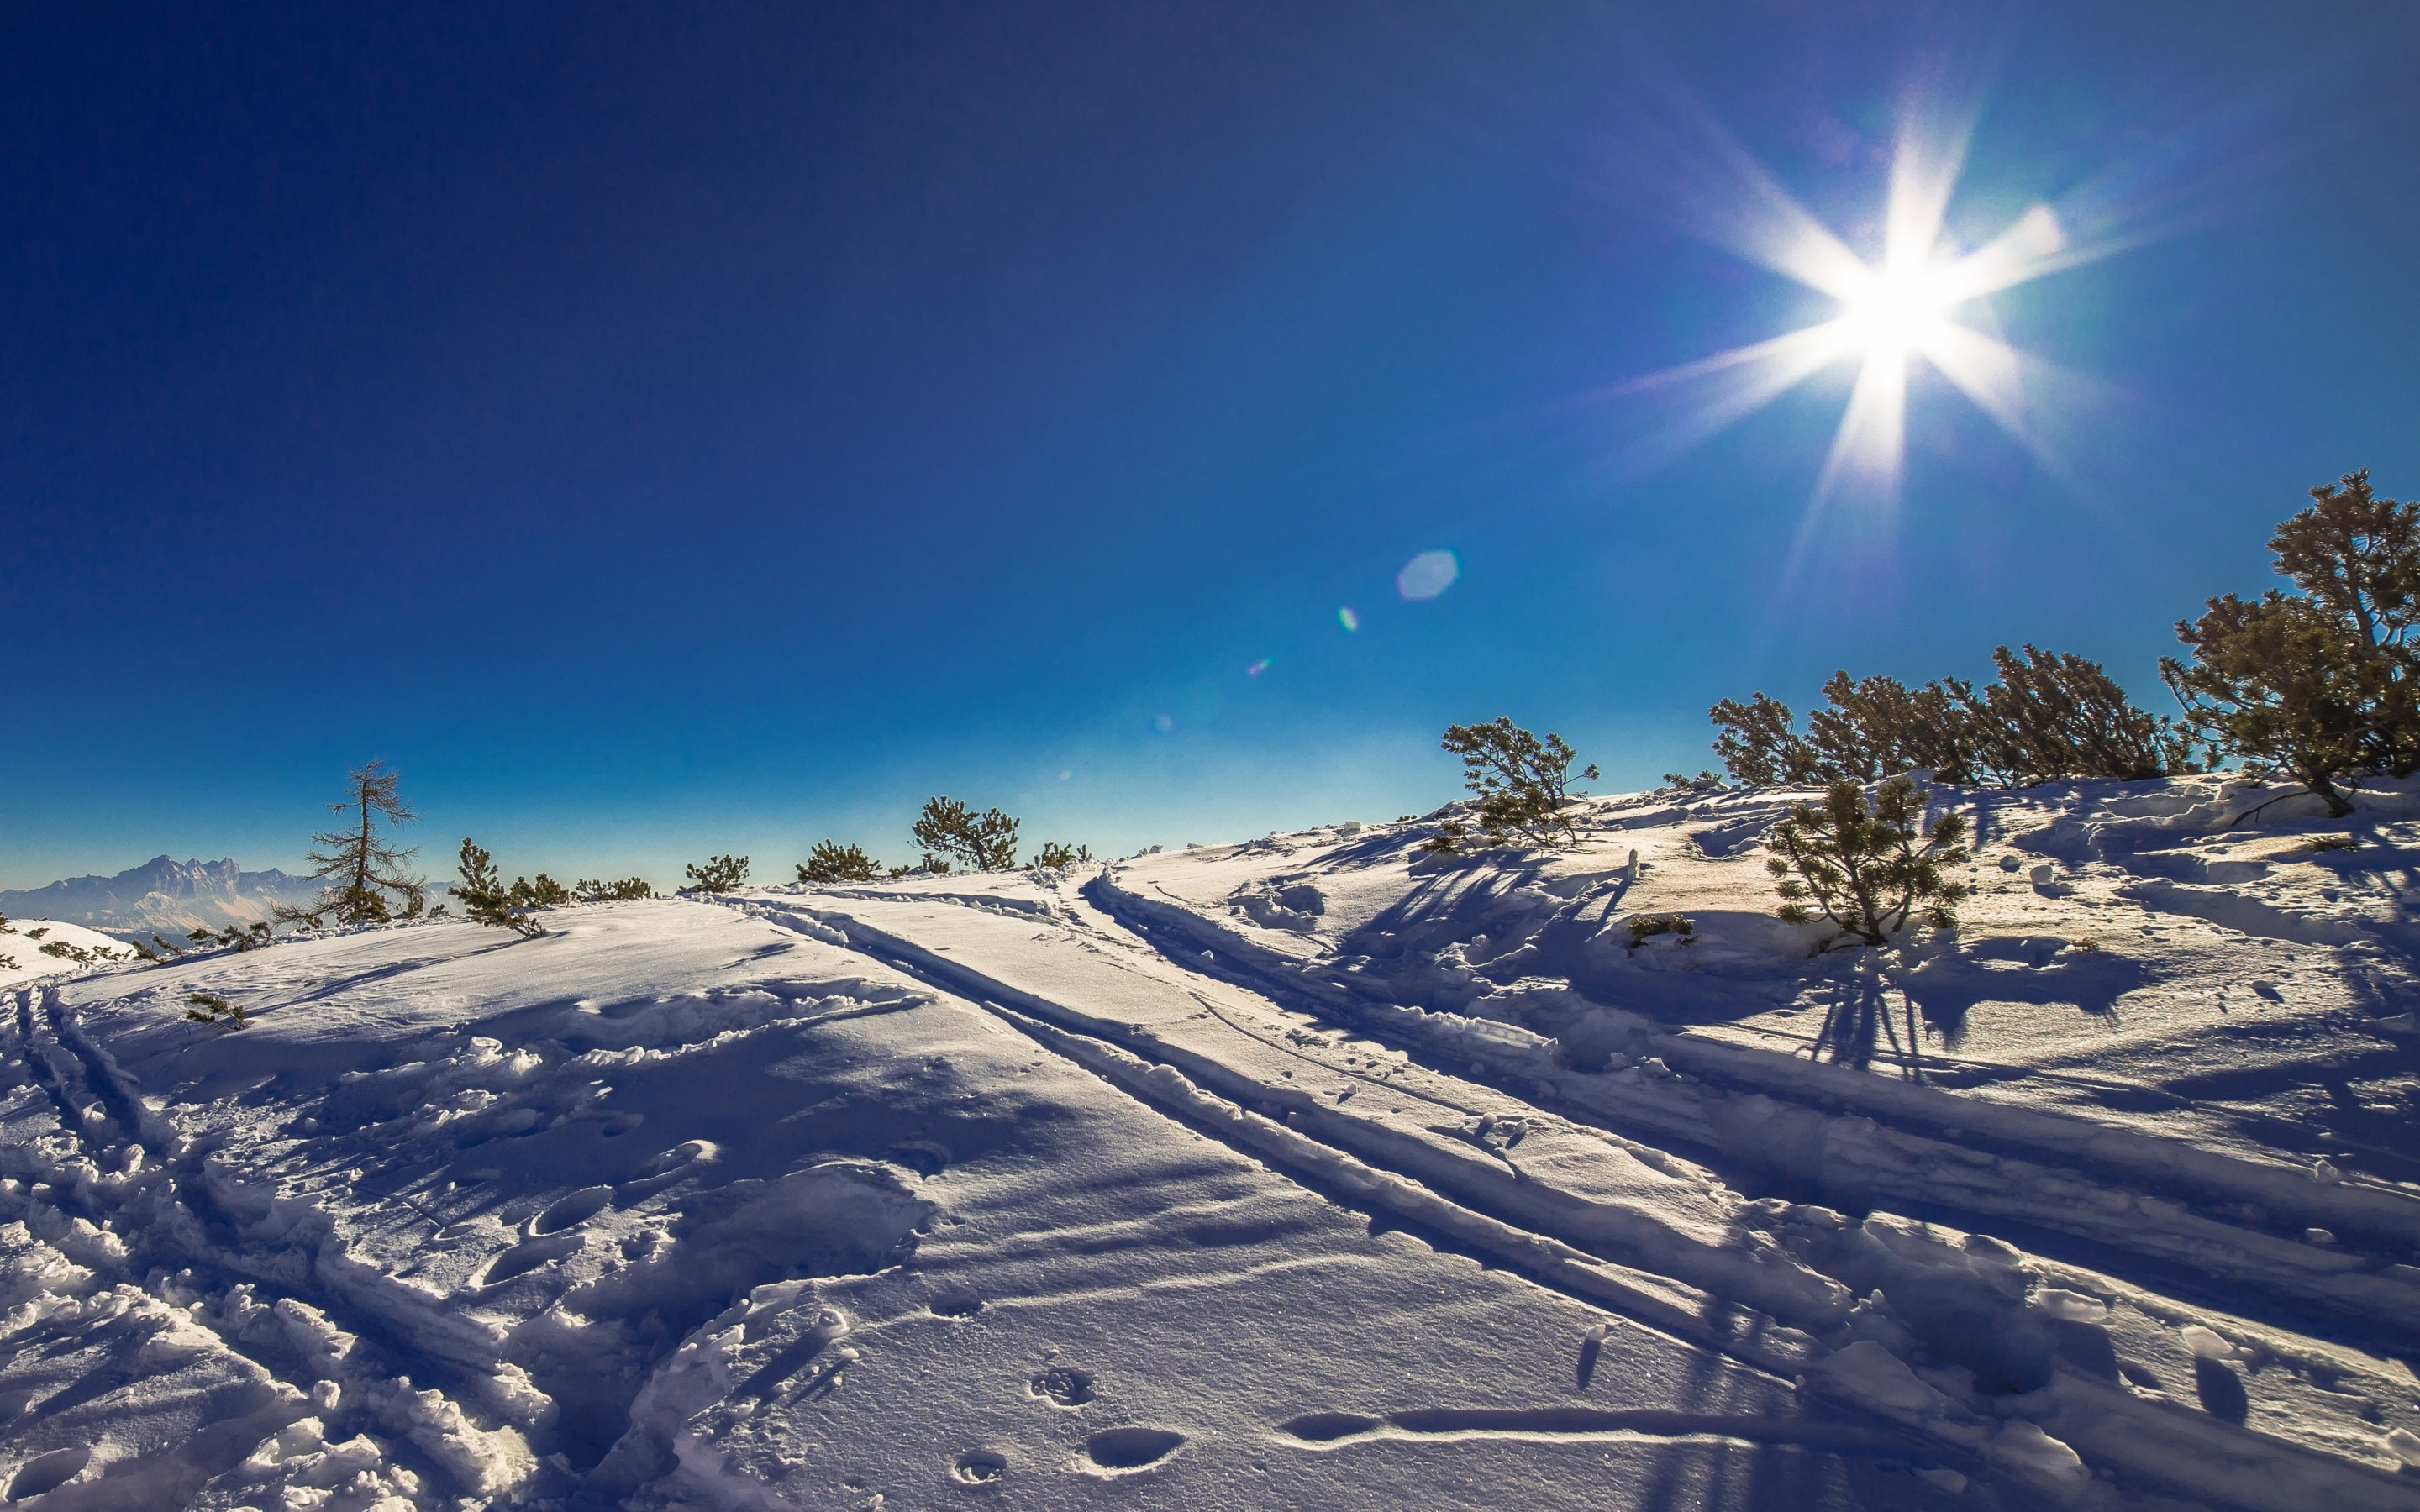 Sunny day in this Winter landscape wallpaper 2880x1800